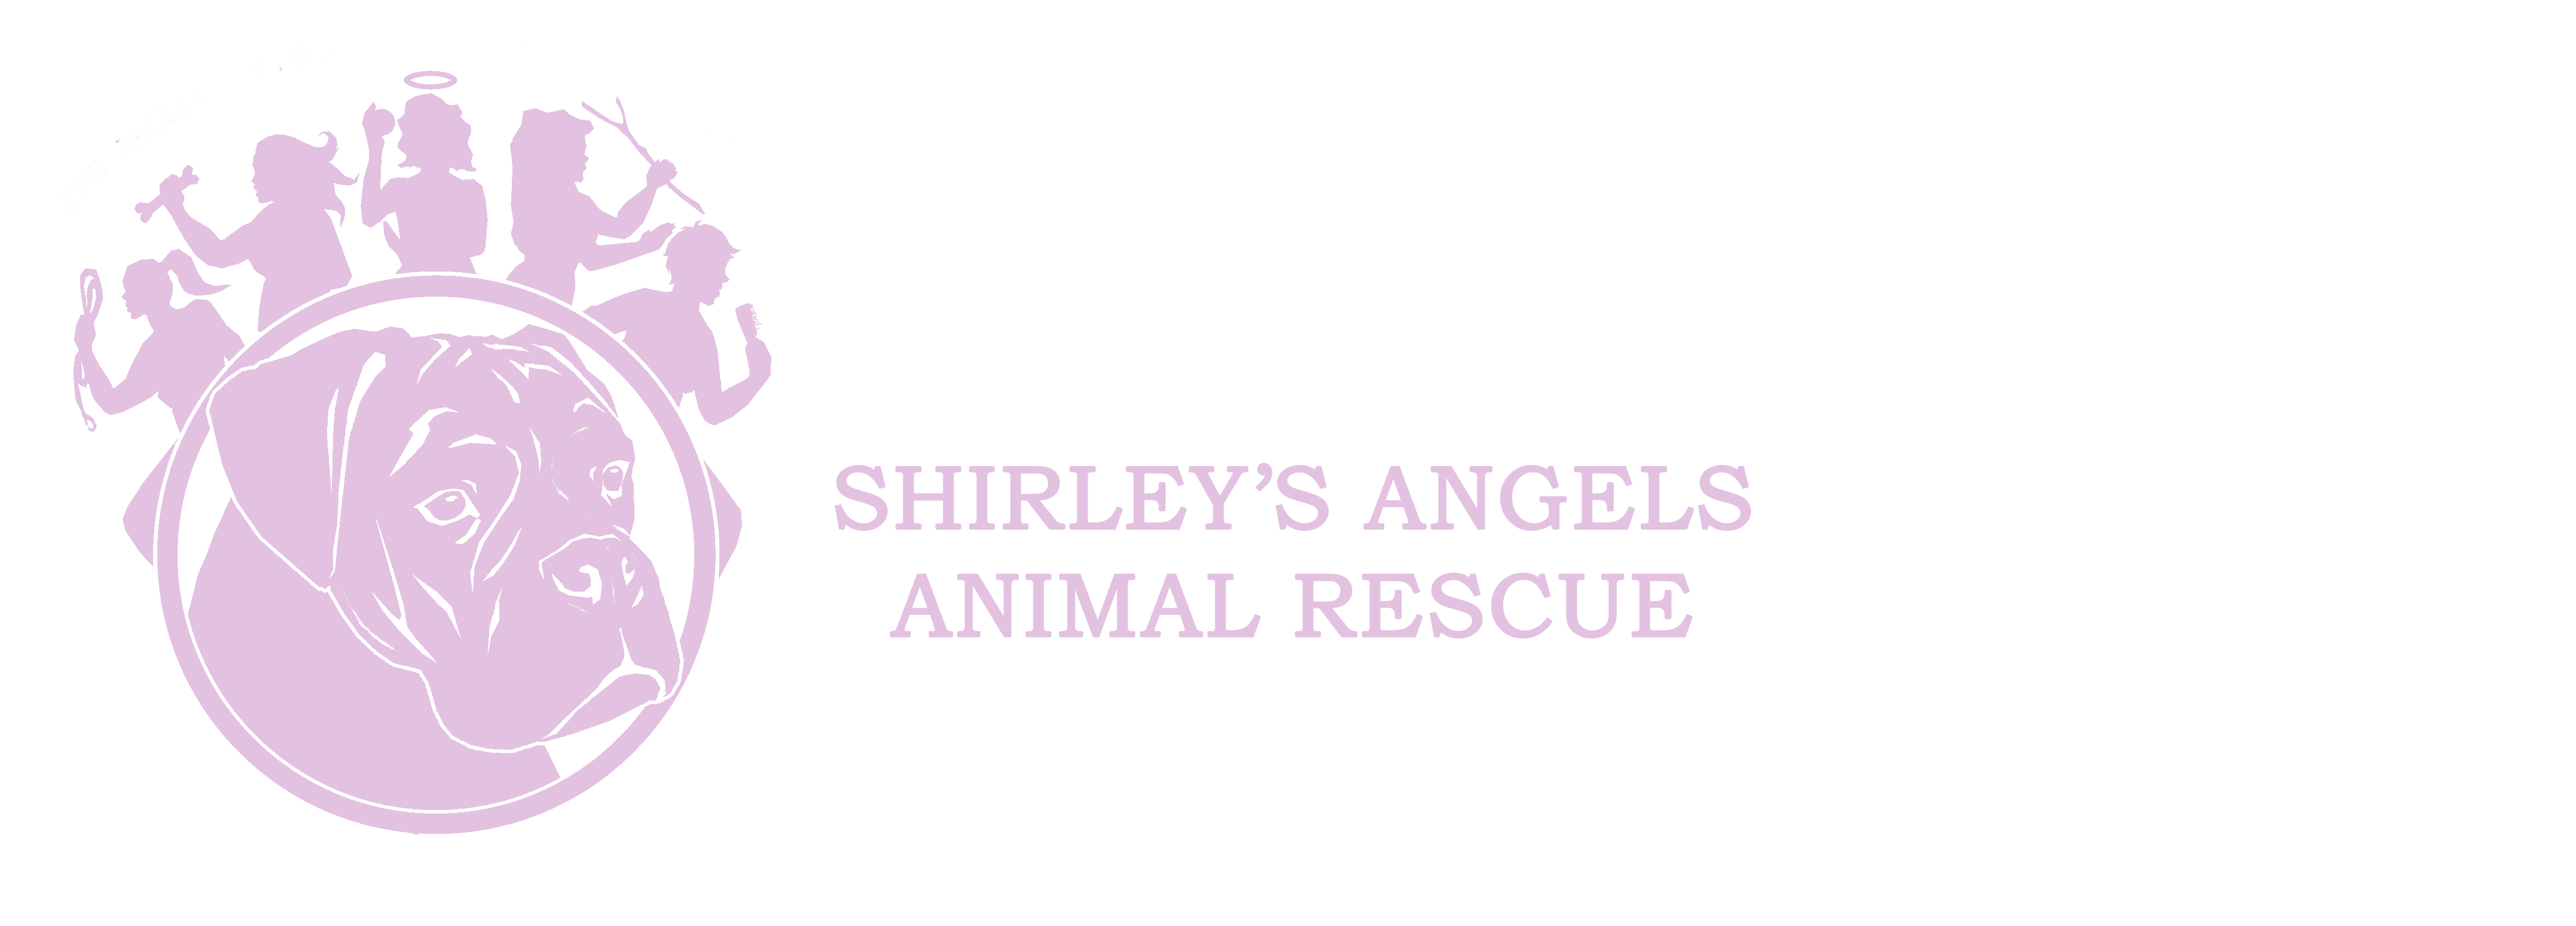 Shirley's Angels Animal Rescue